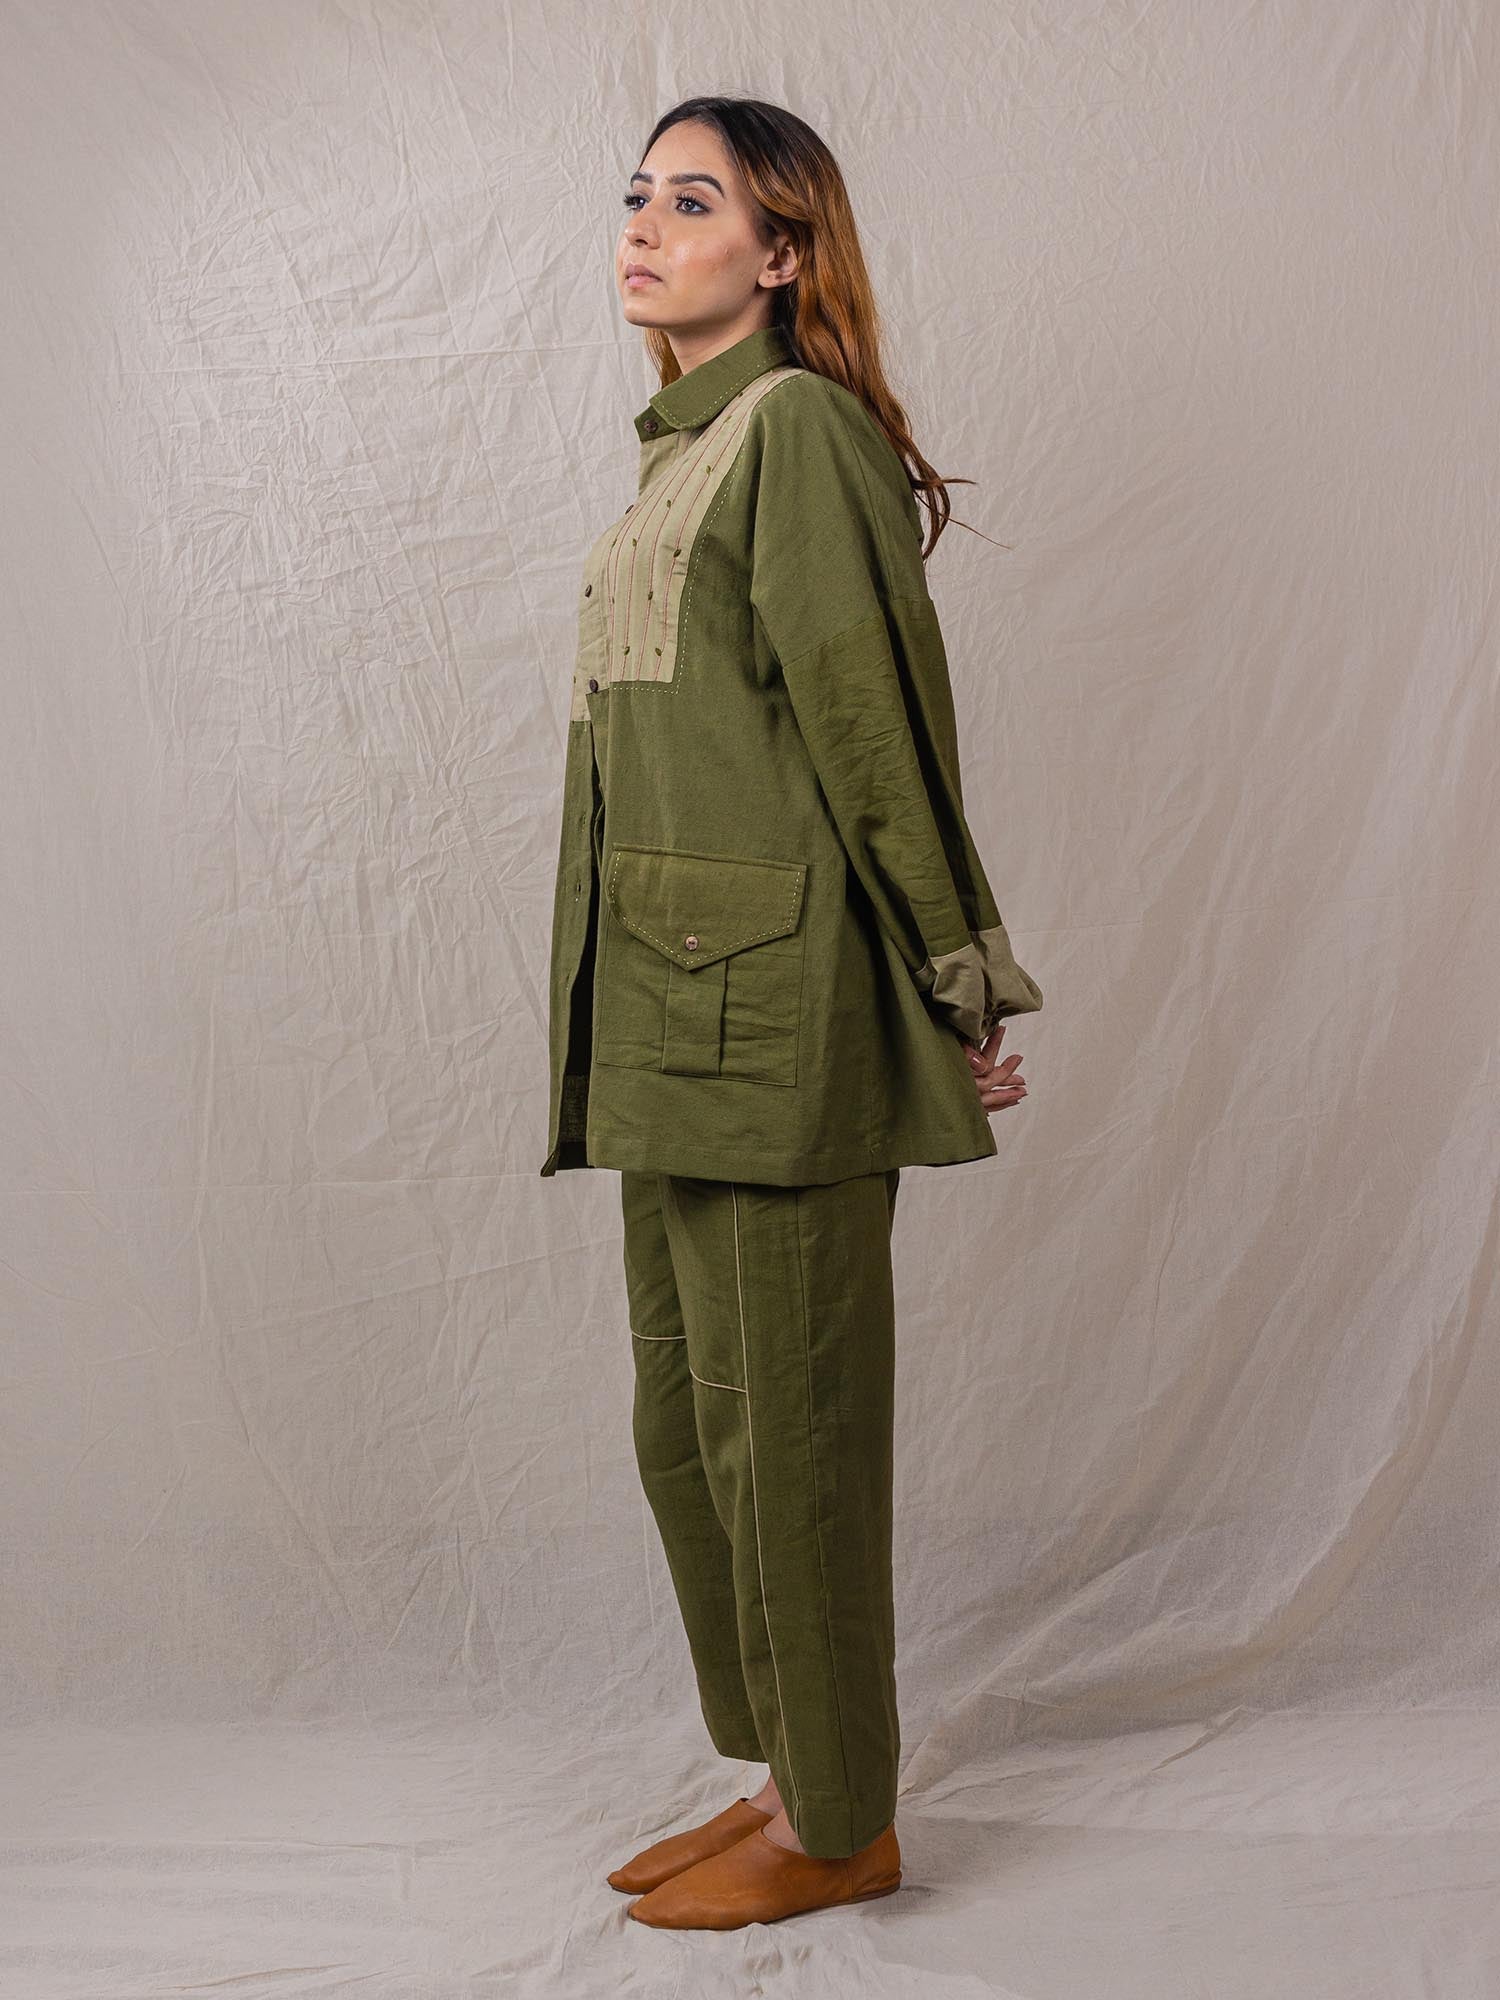 three piece set top jacket and pants green colour side